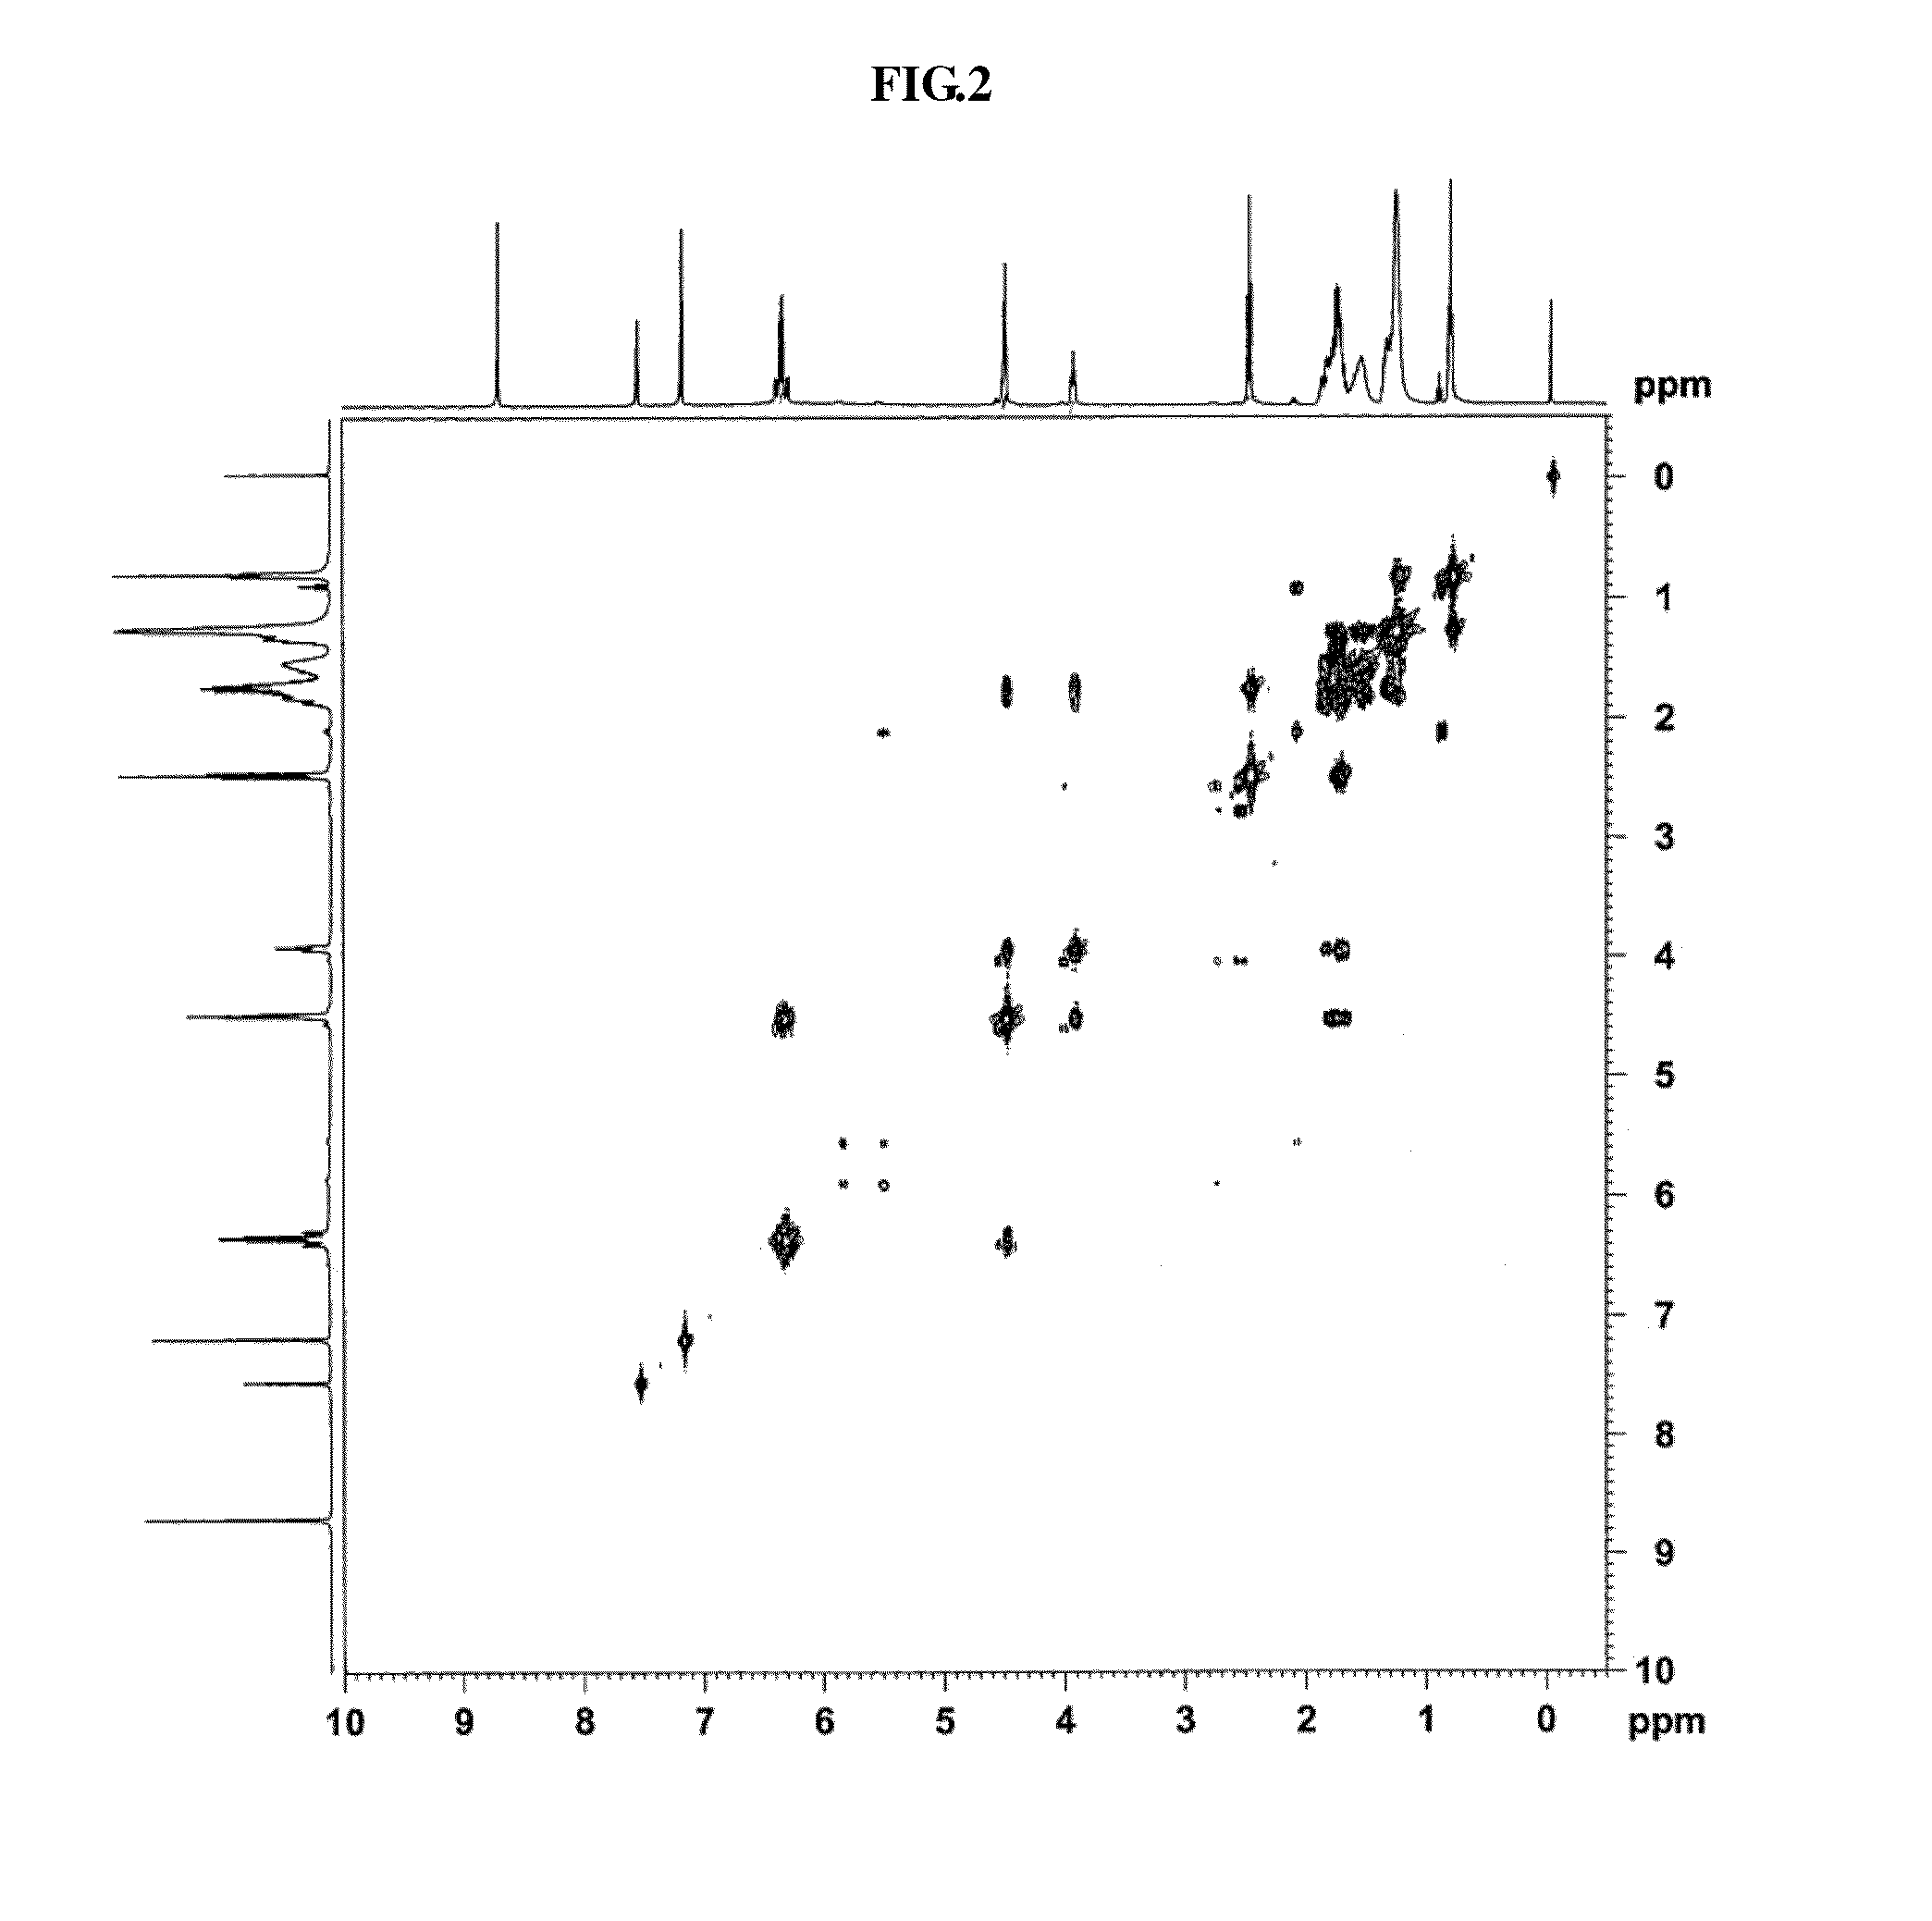 Composition for treatment of obesity using wheat bran extract or active ingredient isolated therefrom